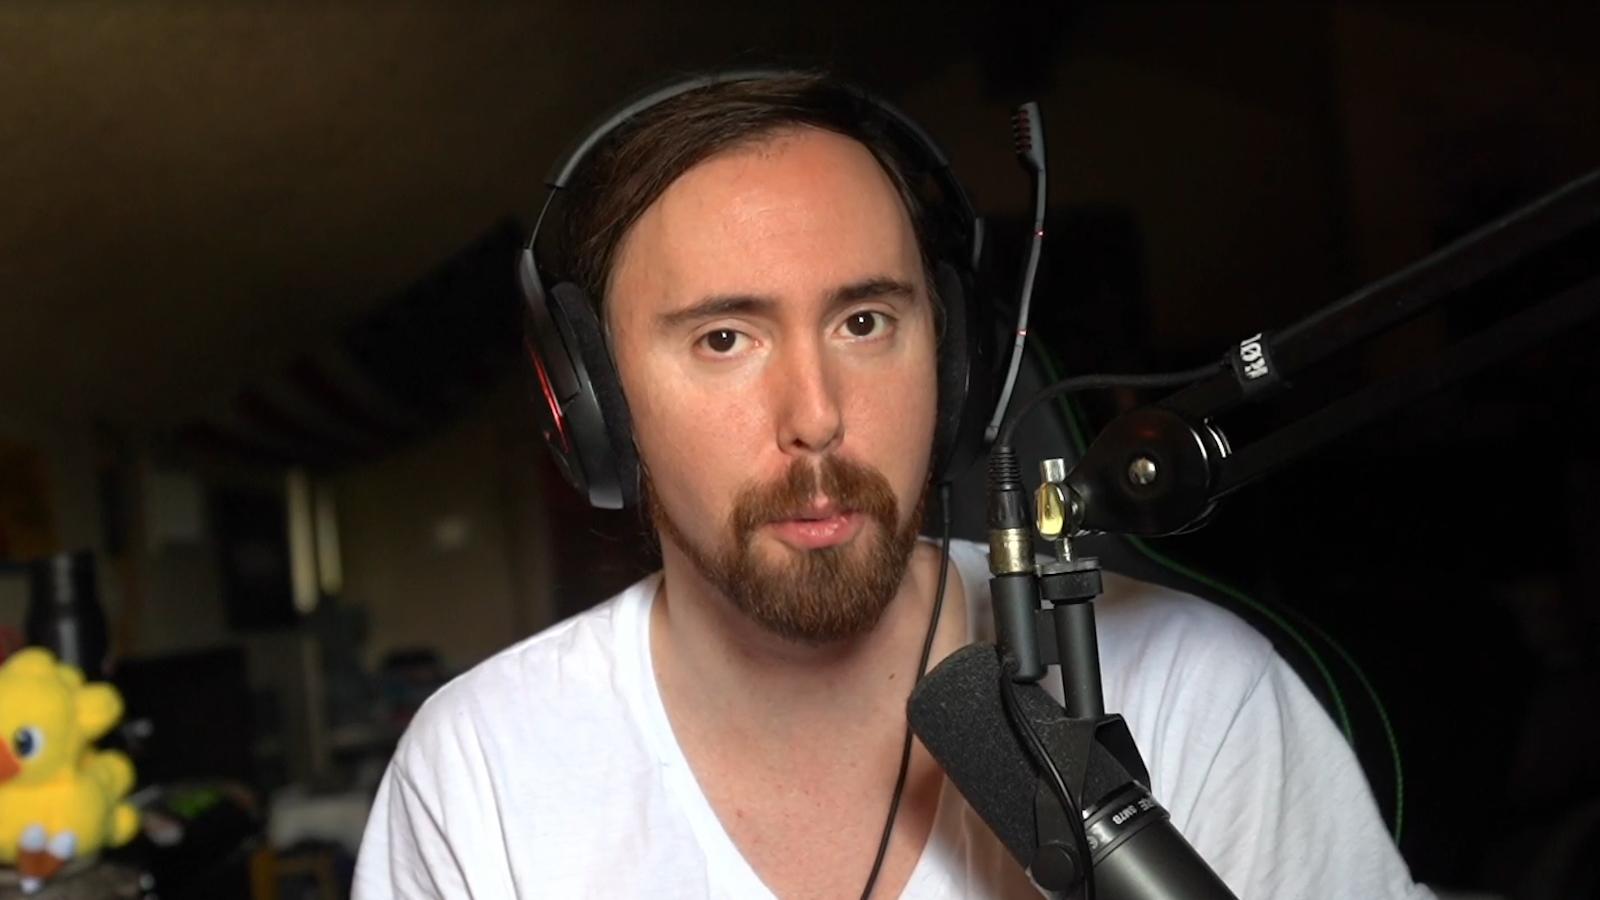 Asmongold streaming reaction to Twitch guidelines.